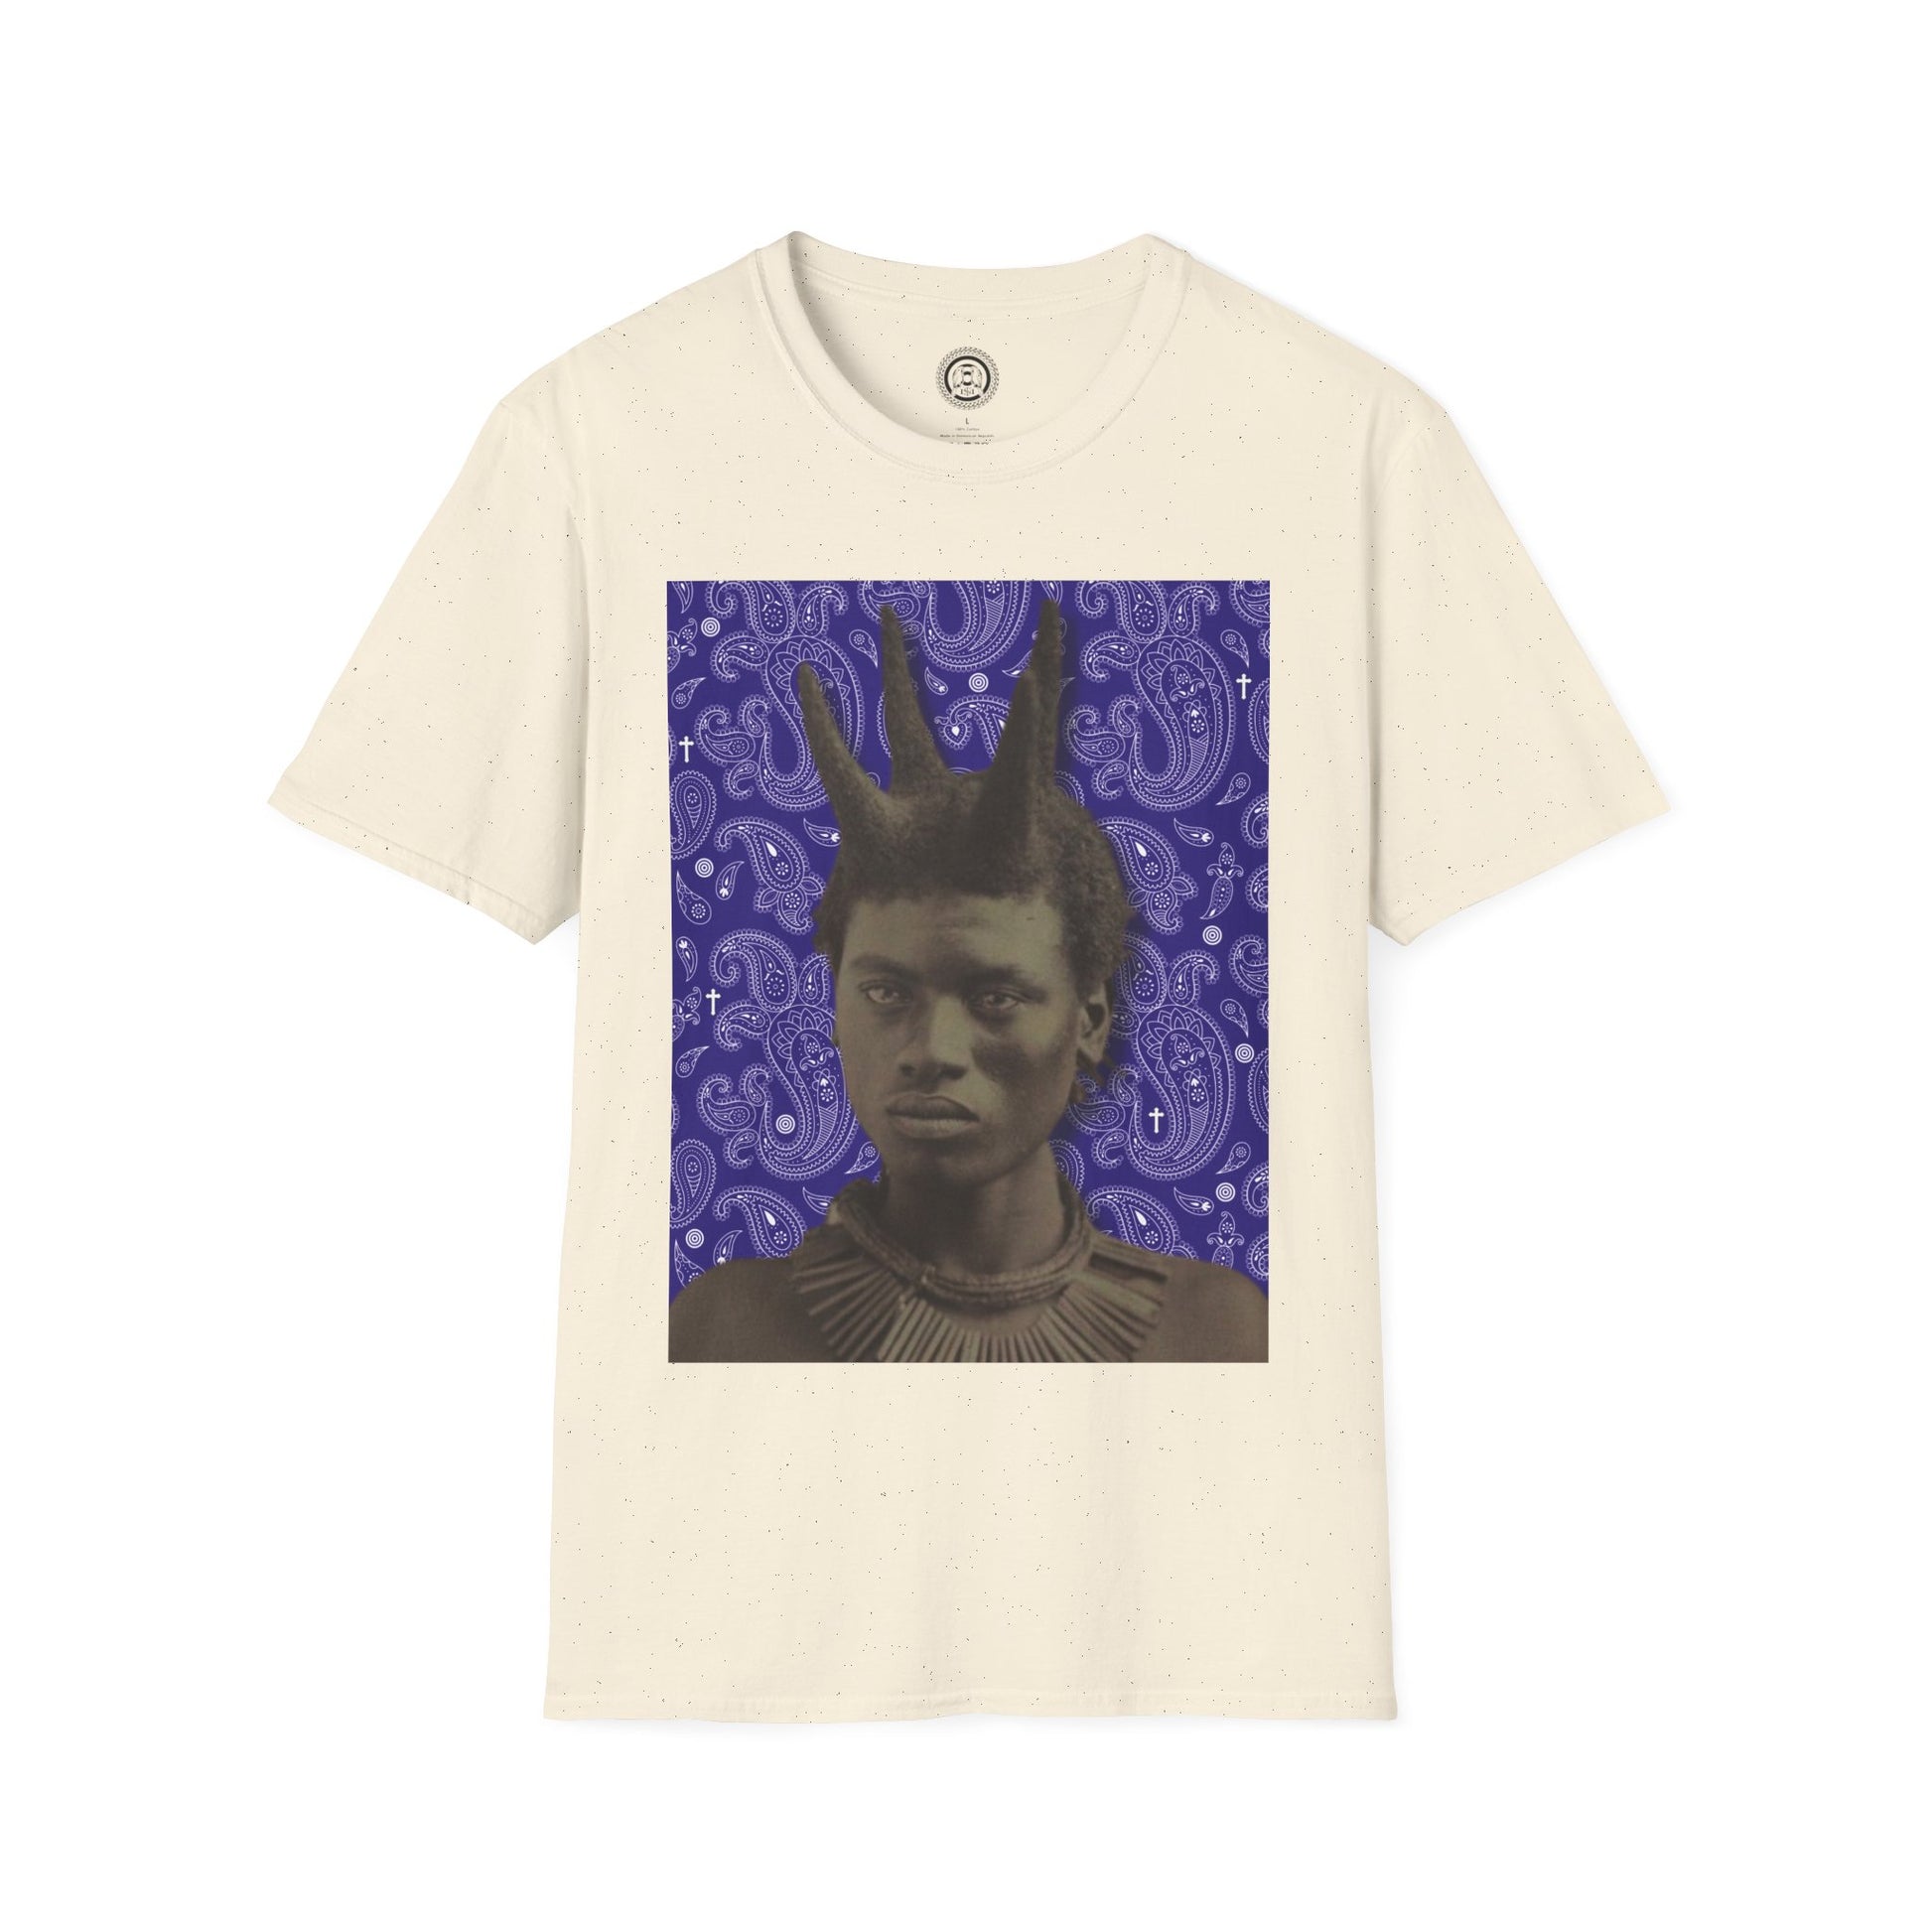 Front TShirt Ivory Printed Portrait of African Tribesmen with Wick over Blue Paisley Background